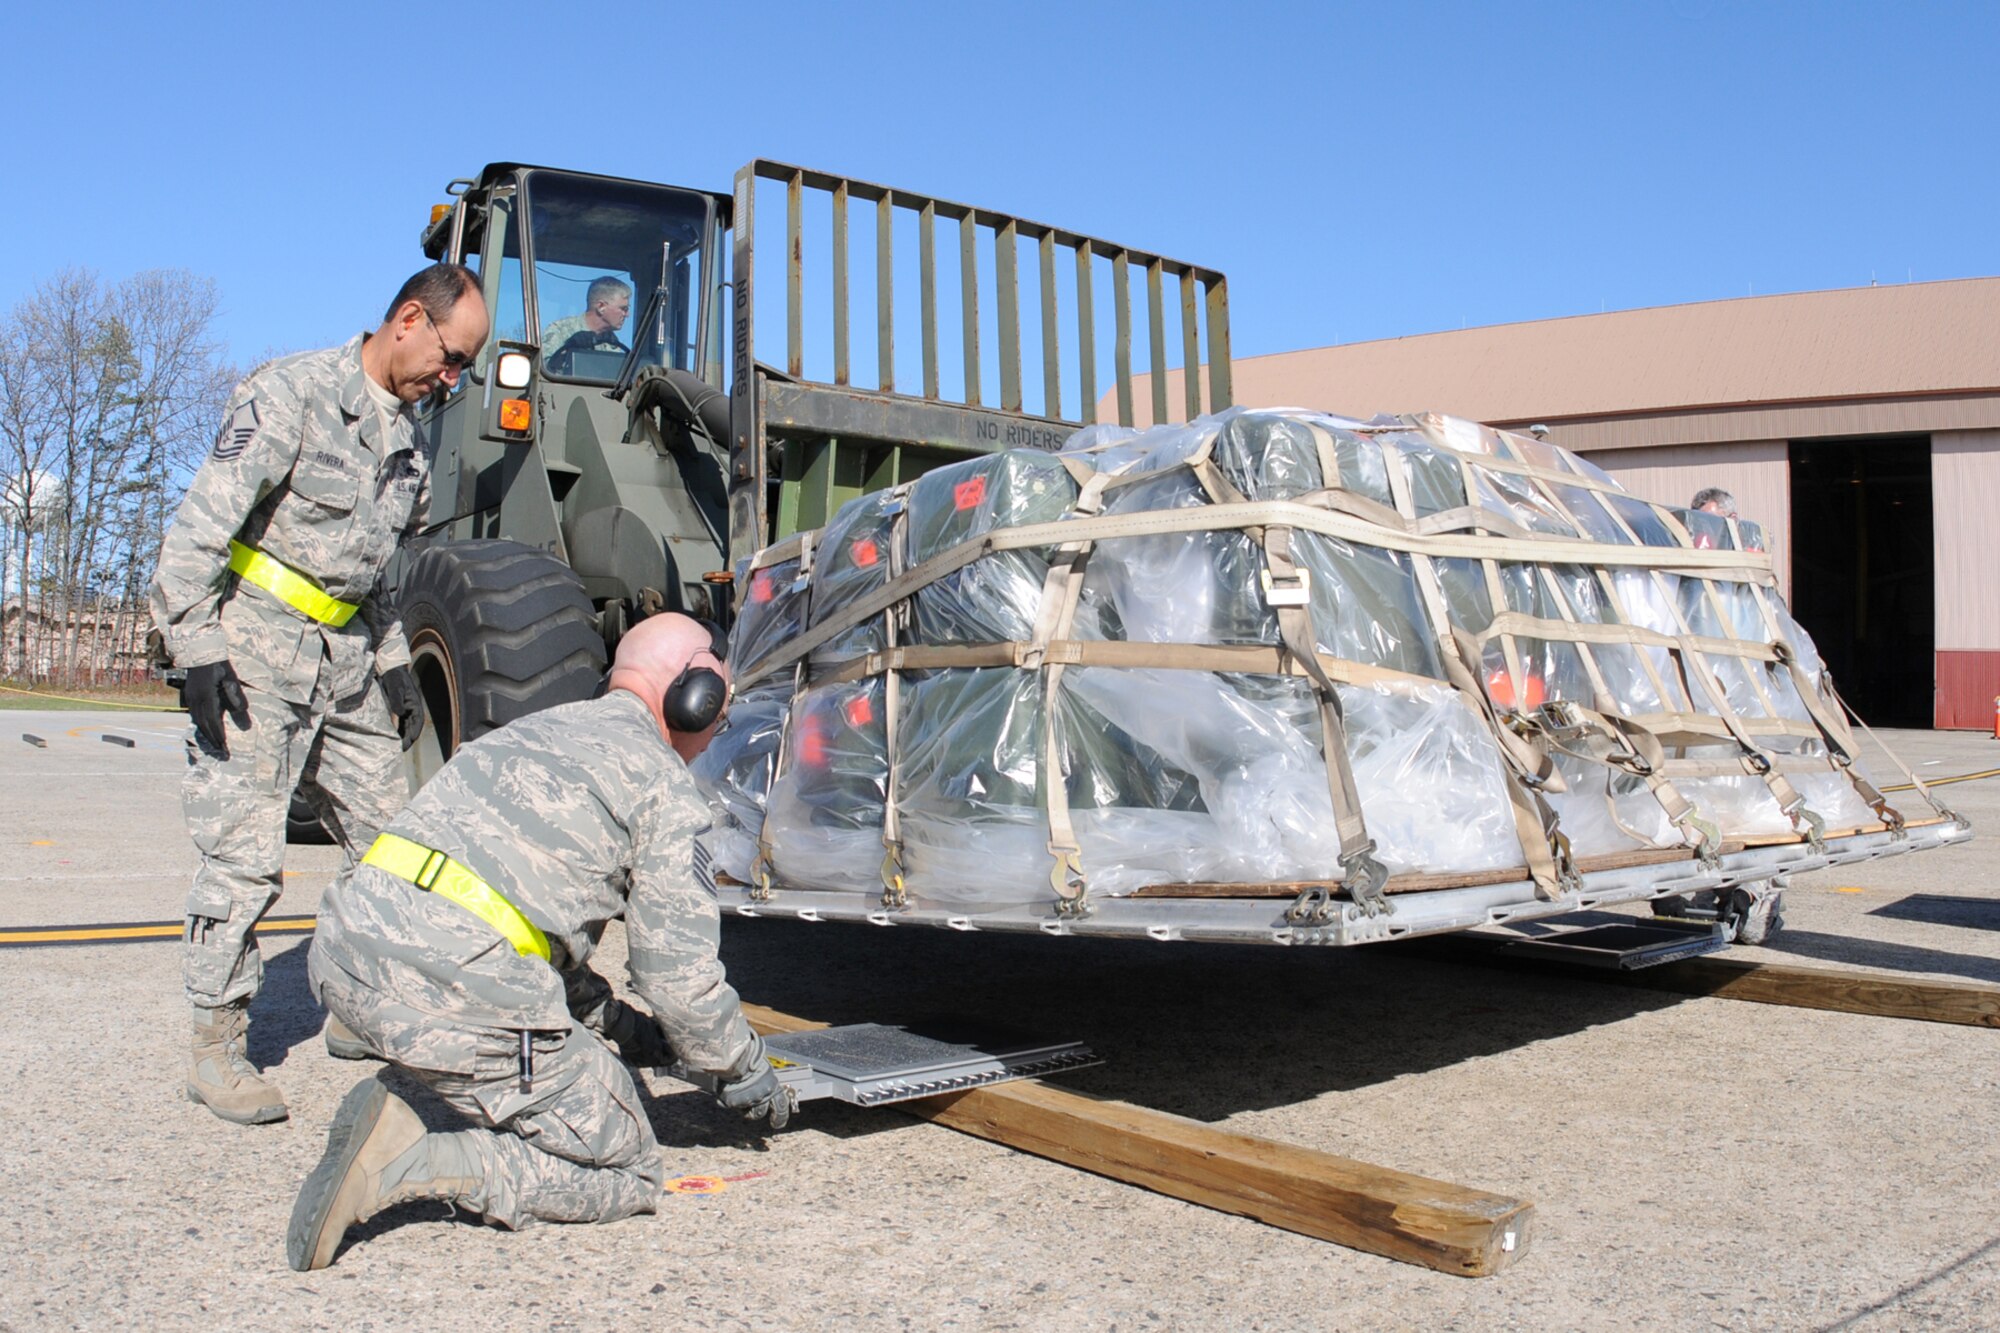 N.H. Air National Guard Master Sgt. Cesar Rivera (standing) and Master Sgt. Mark R. Rix process cargo during a readiness training exercise in preparation for an upcoming inspection planned for later this year, May 5, 2013, Pease Air National Guard Base, N.H. (U.S. Air National Guard photo by Staff Sgt. Curtis J. Lenz/Released)